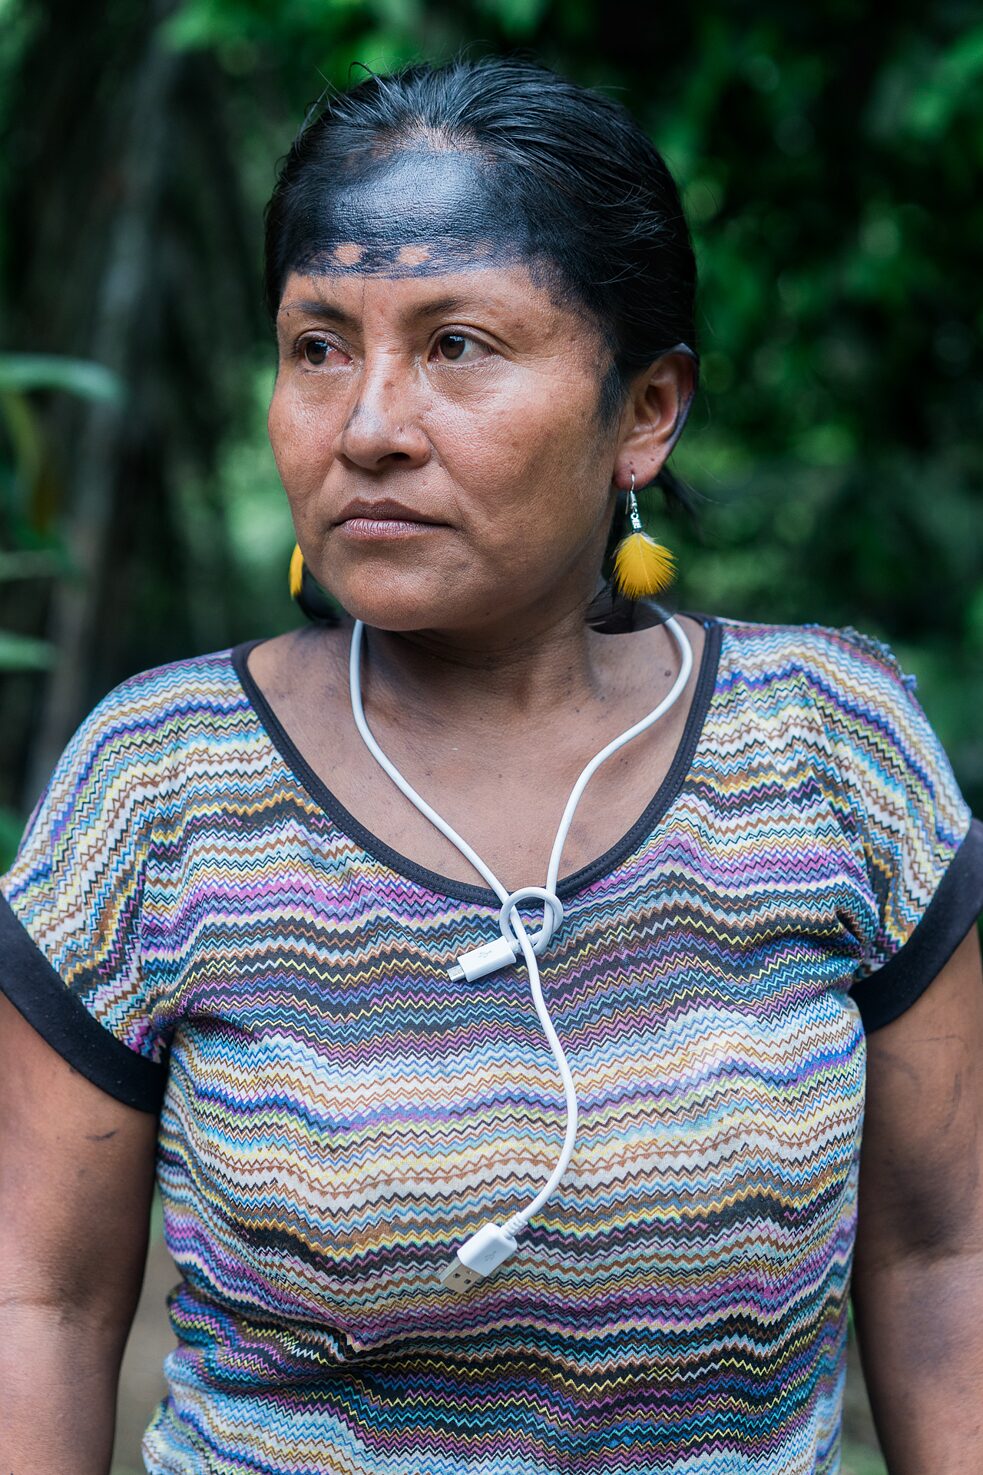 2019. Portrait of Imelda Gualinga on her way to Wayusa Net, a hut with satellite internet connection. This is one of the few places in the community that has enough electrical power to charge batteries, cell phones and computers.  